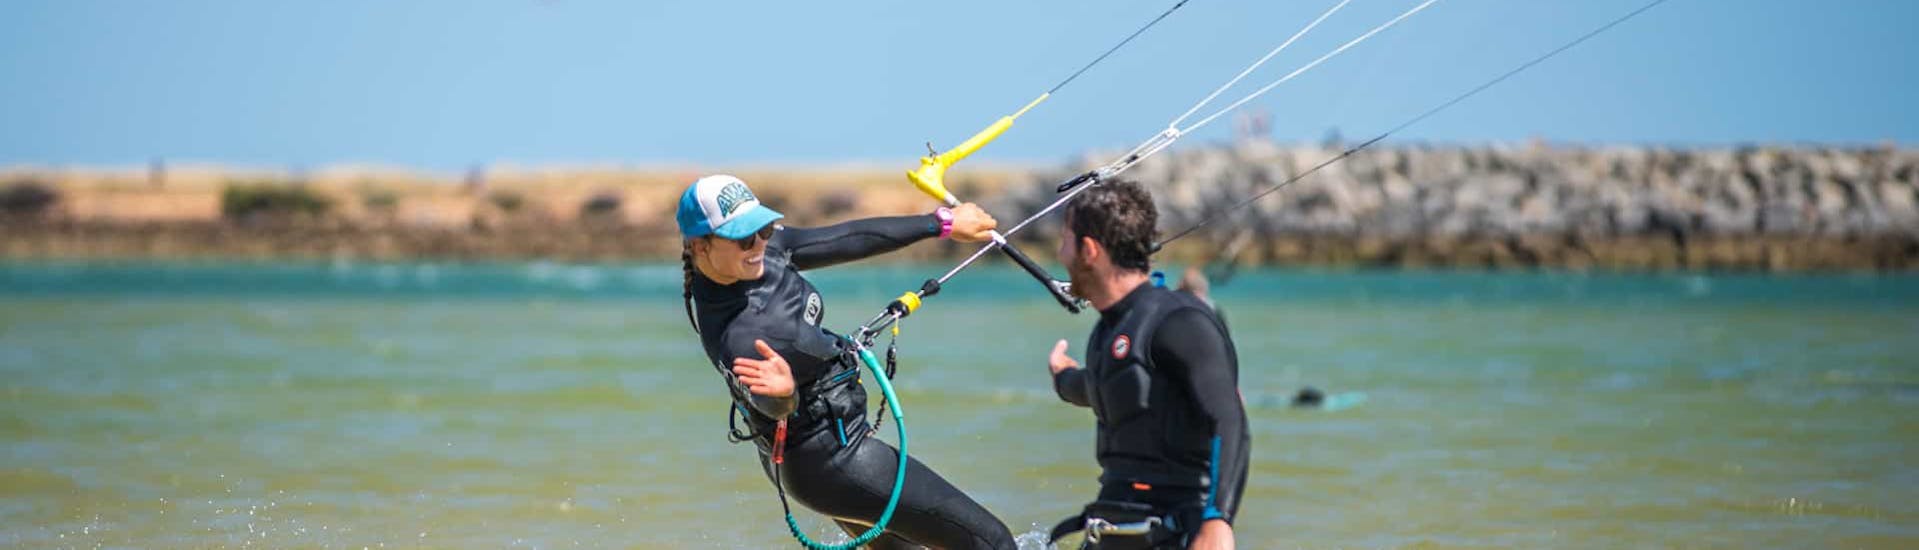 Somebody who is kitesurfing during the lessons organized by Algarve Watersports.